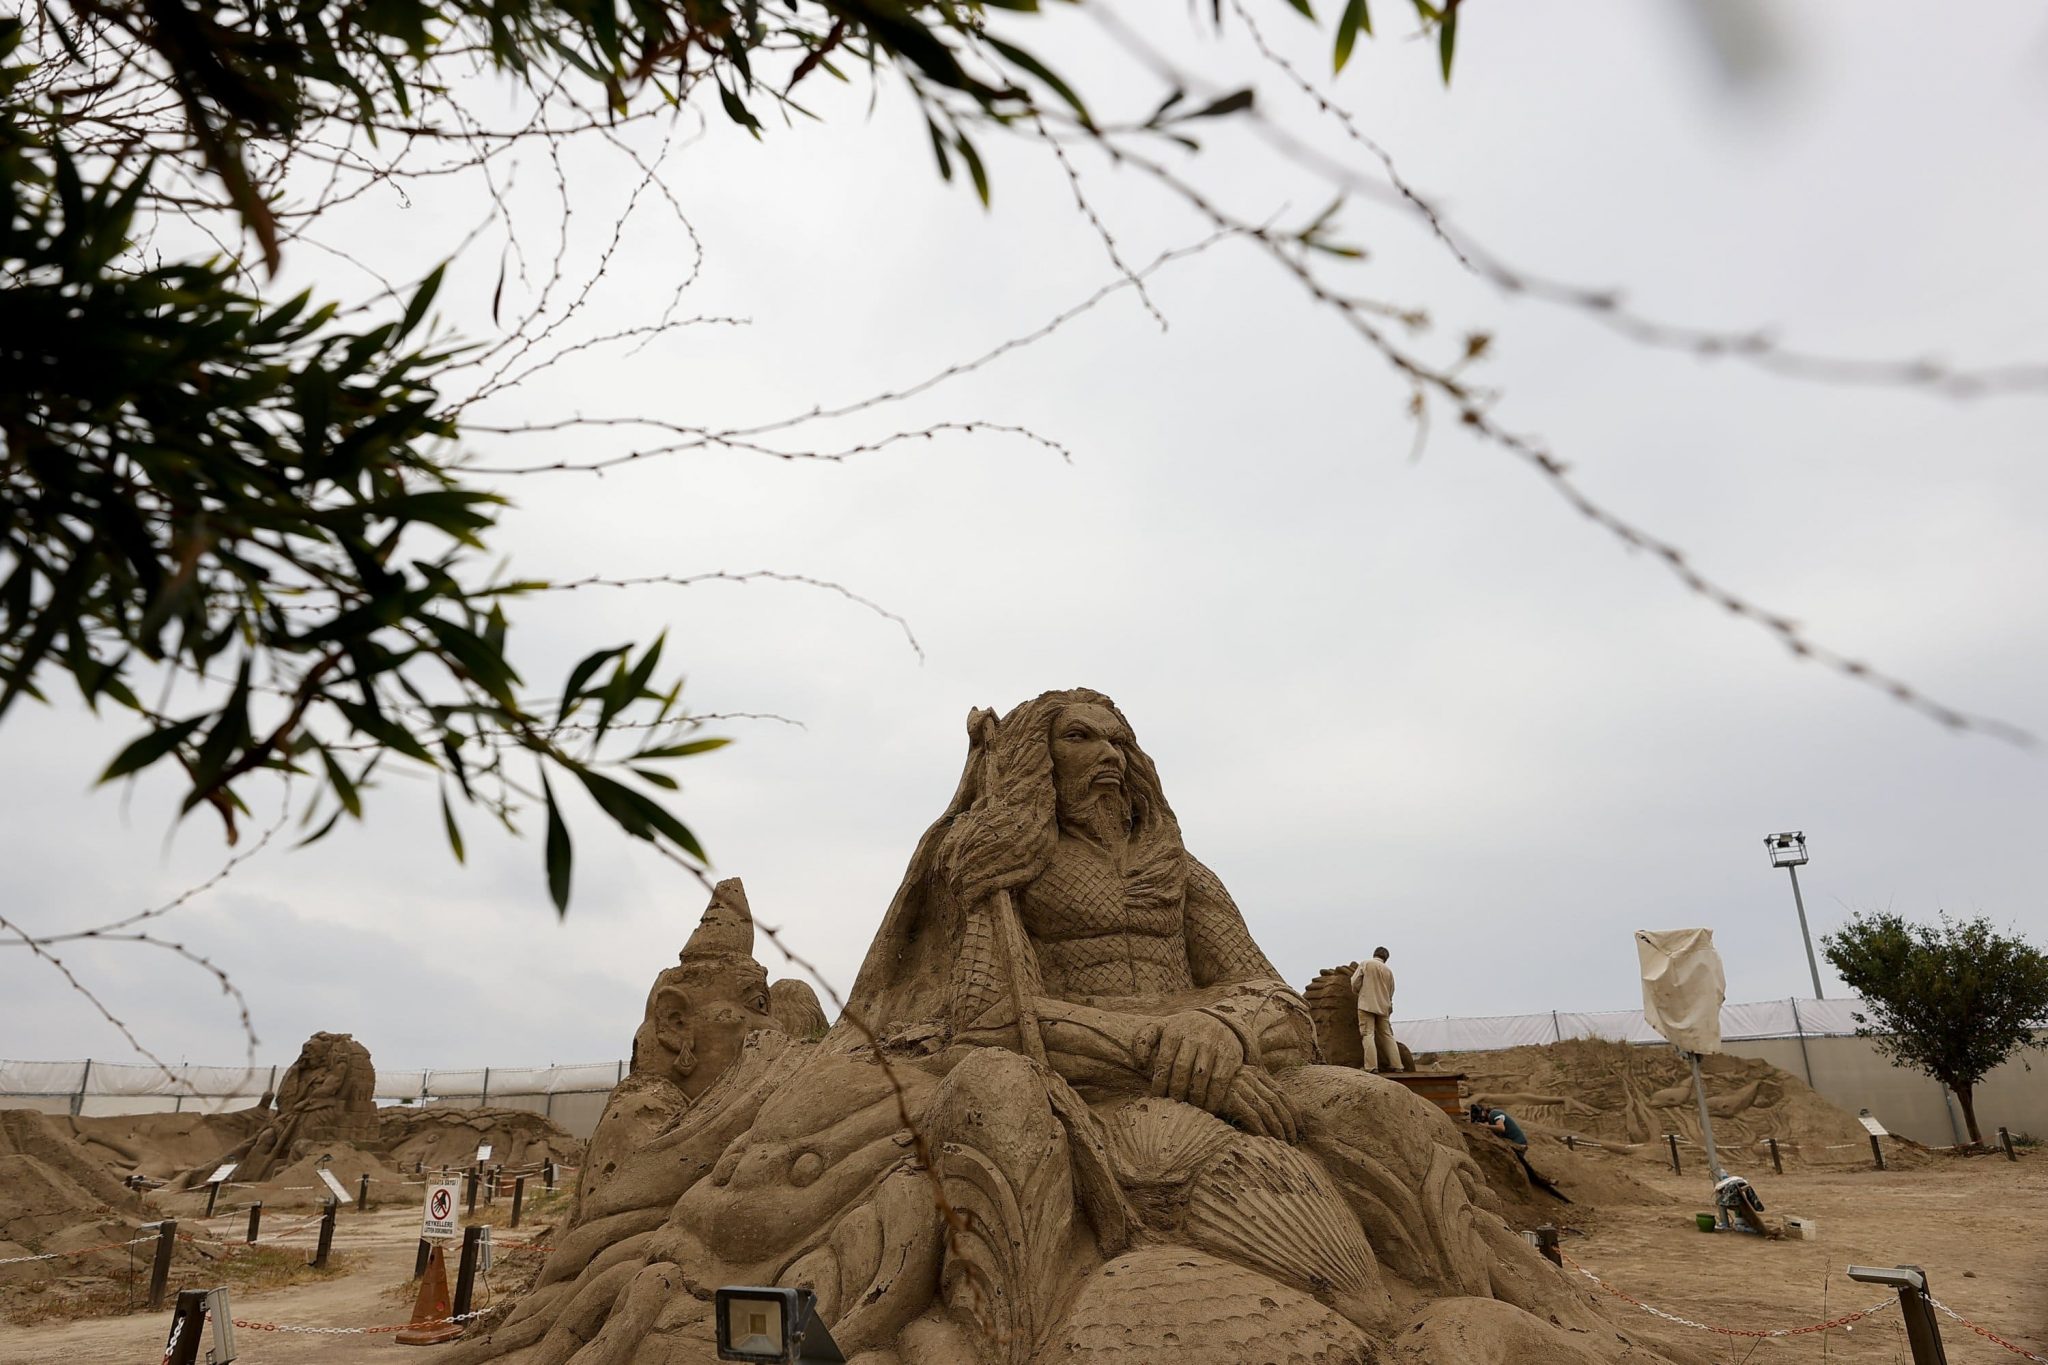 International Sand Sculpture Festival Opens with the Theme "The Lost